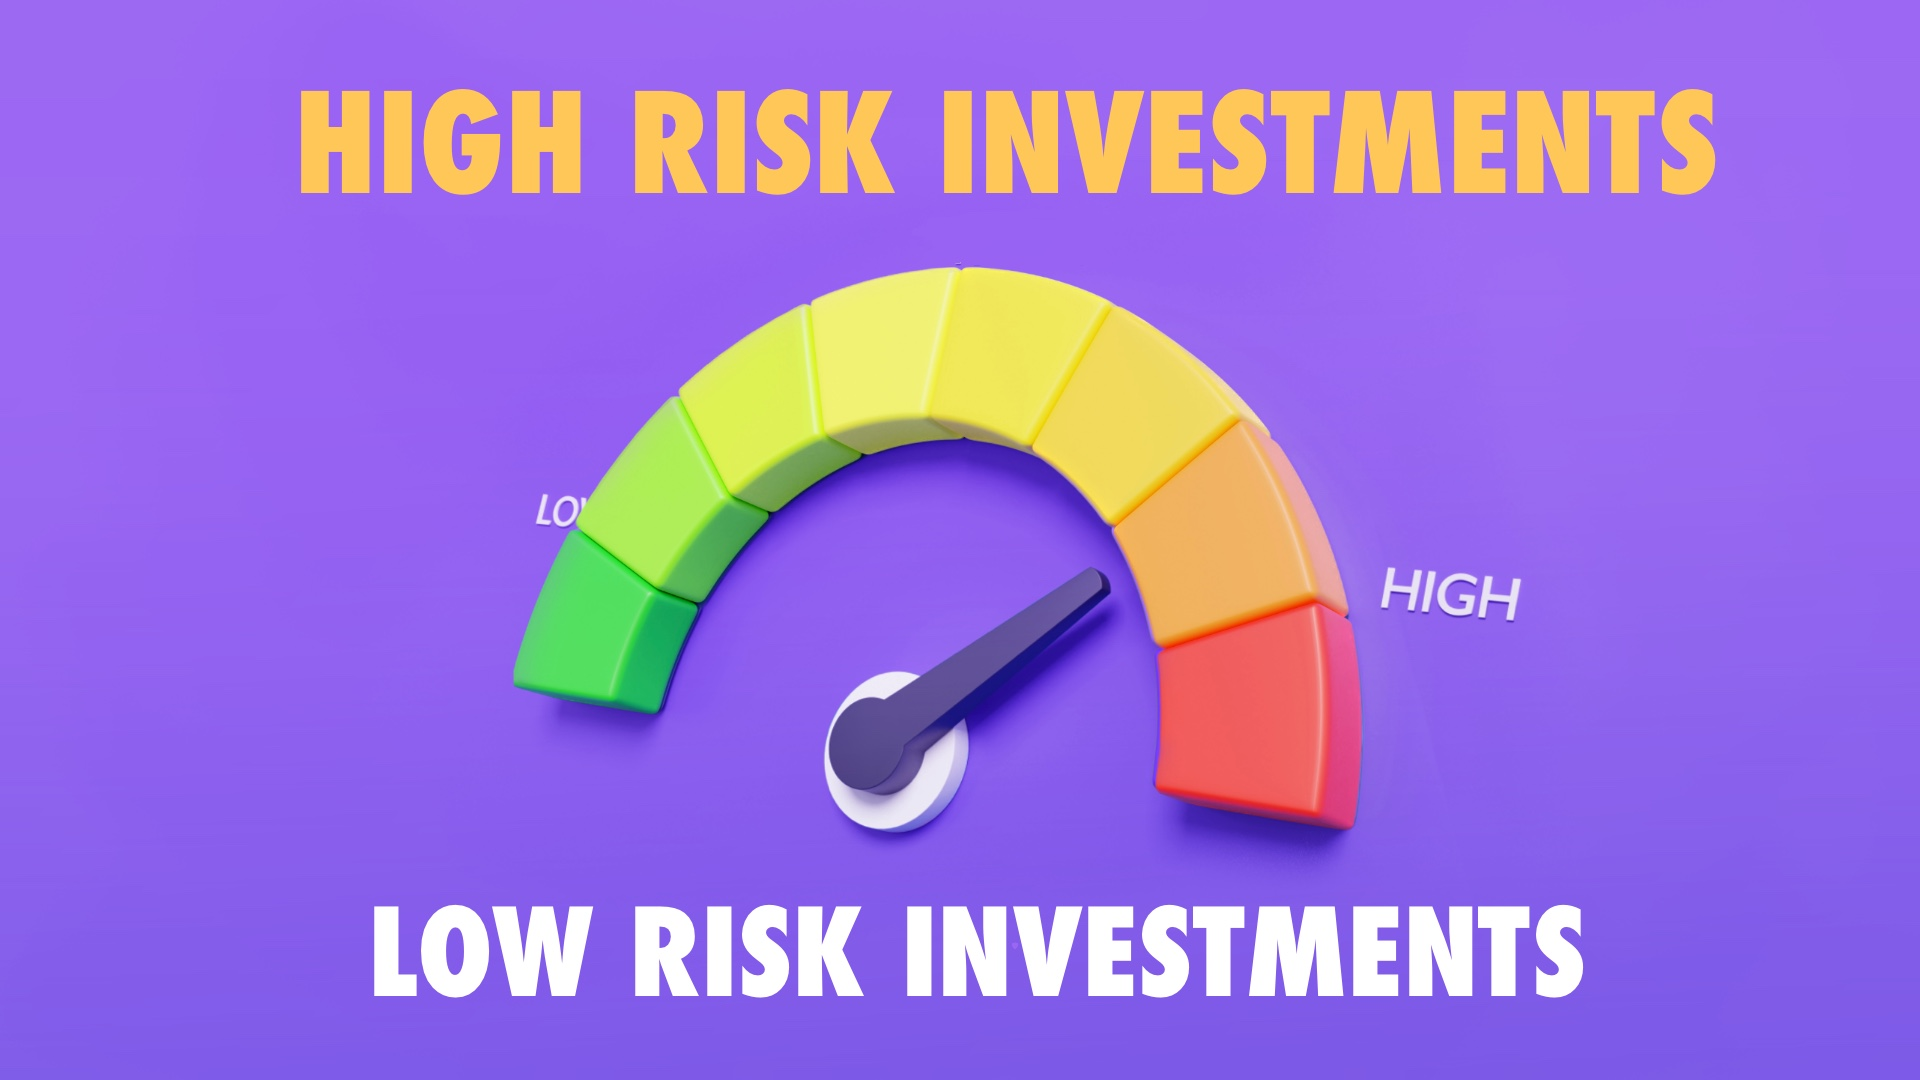 Altos Labs is a high risk investment